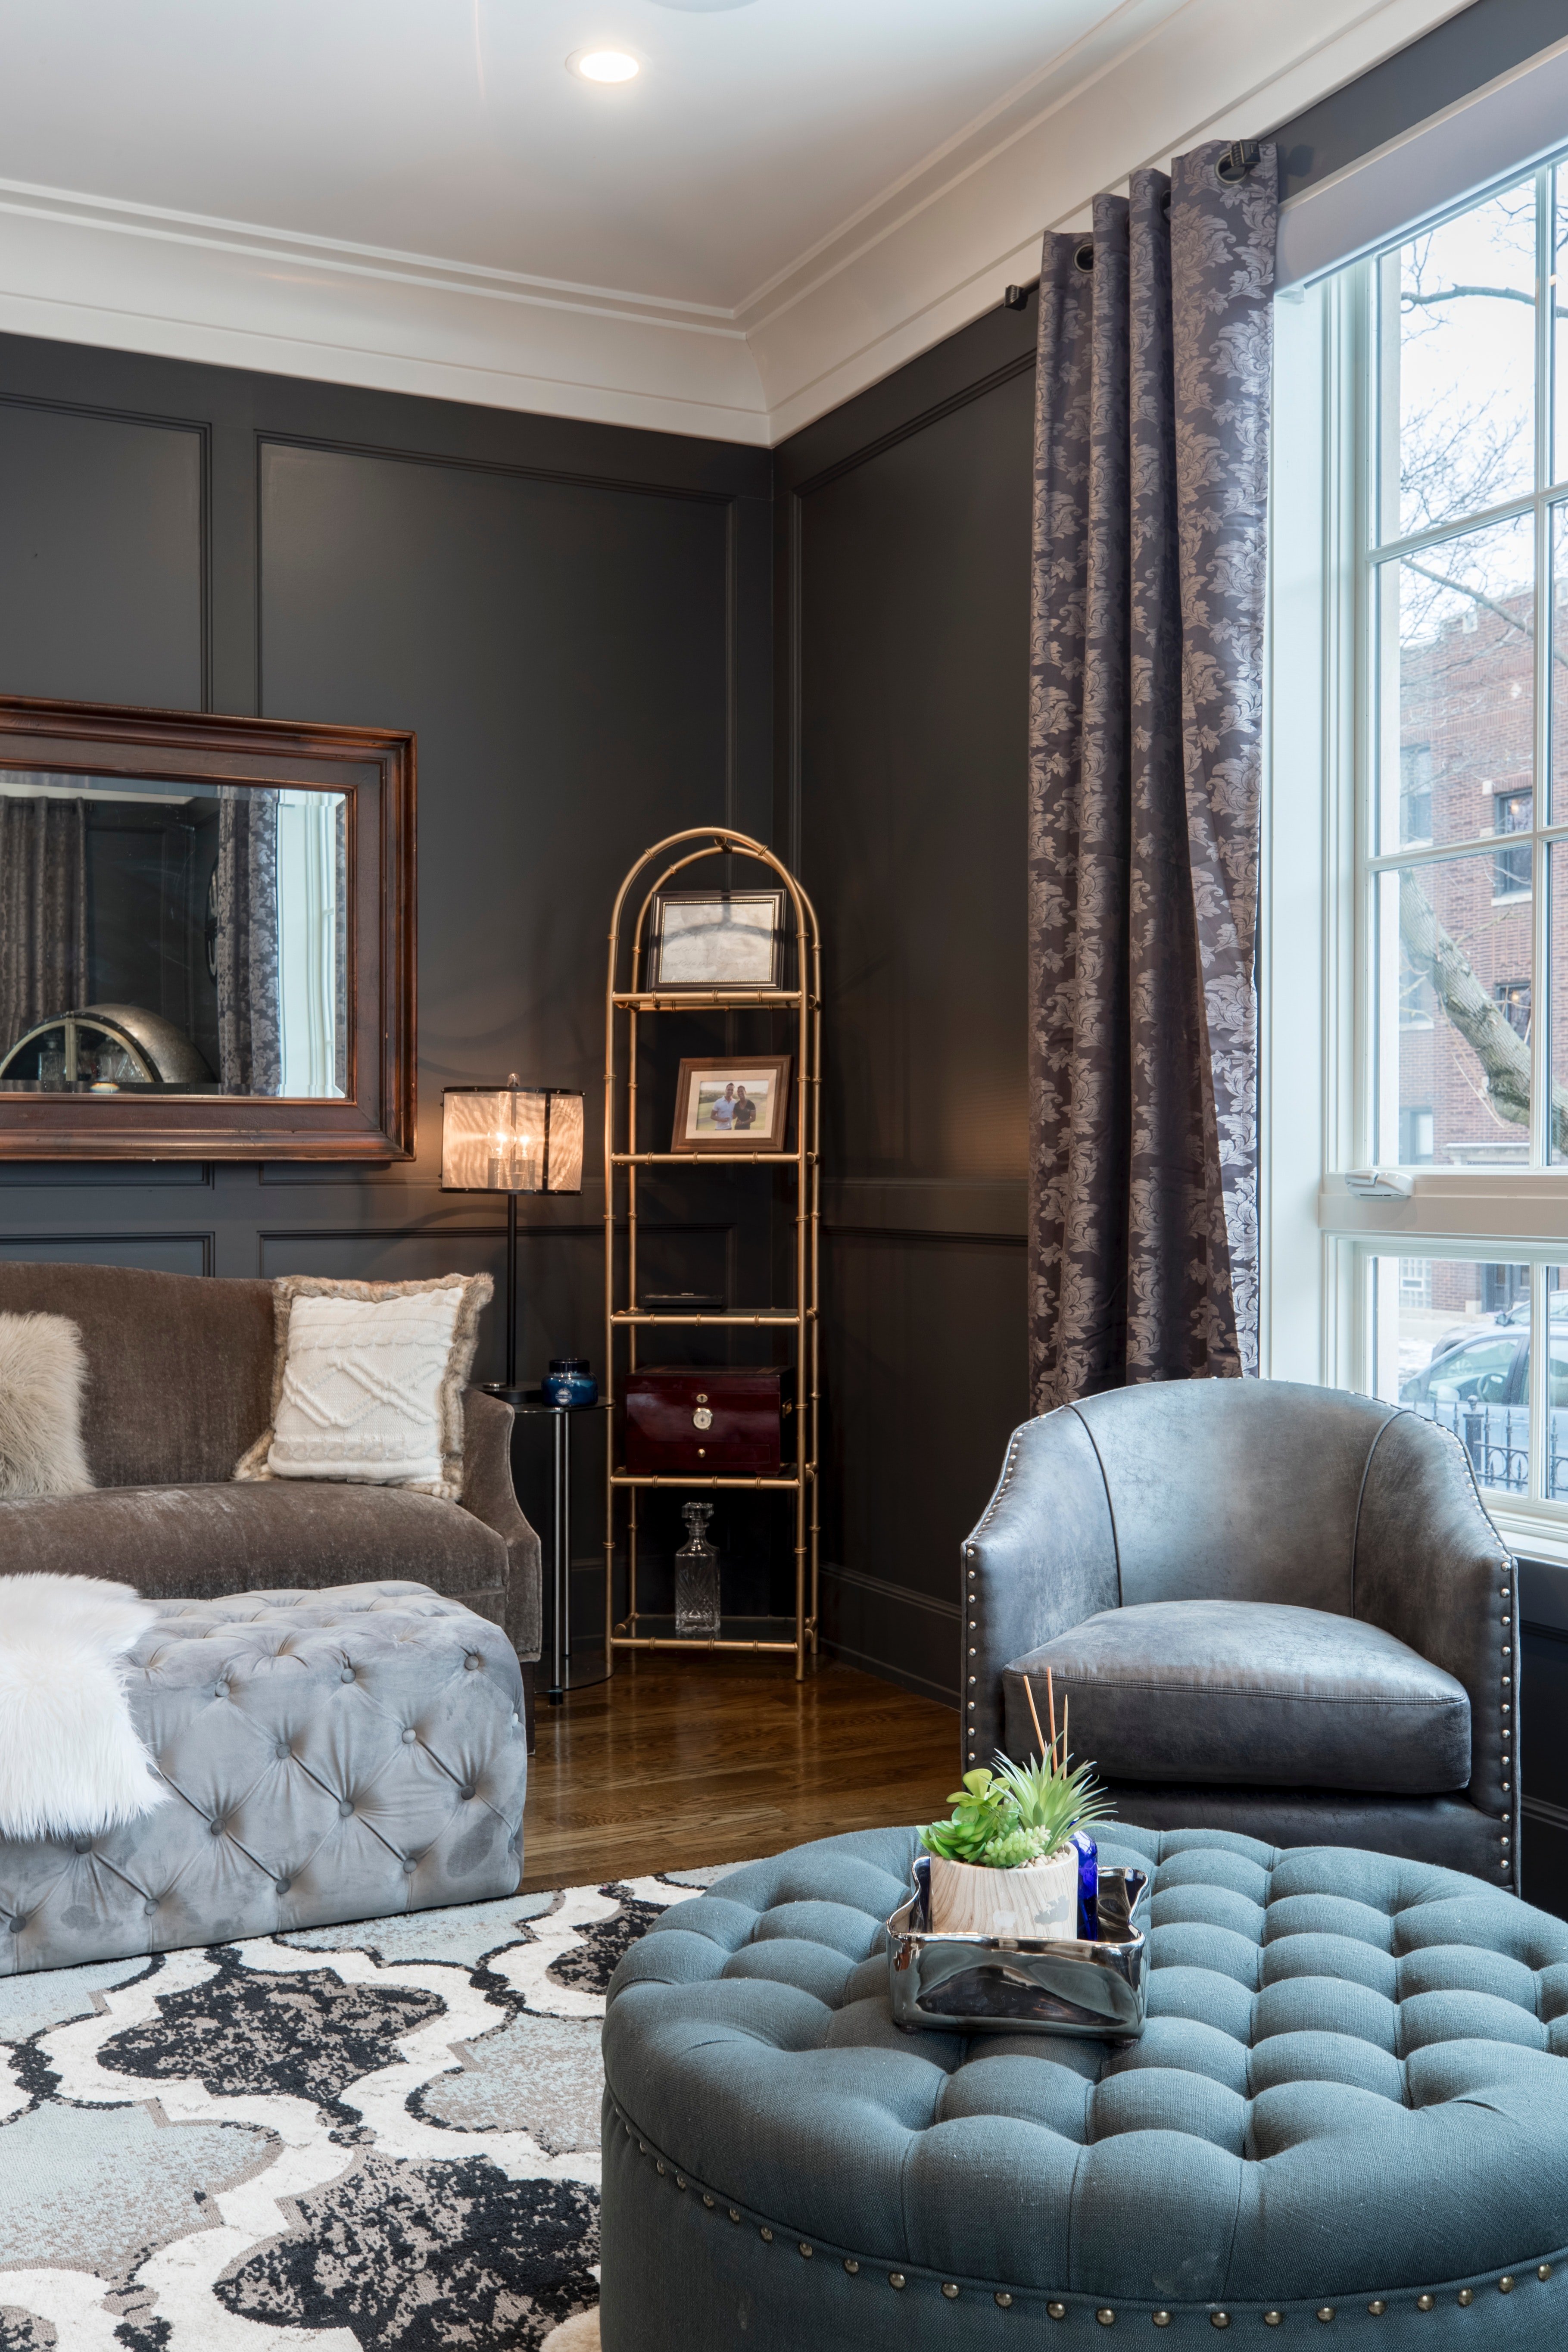 Pictured - An interior design of a house, a gray leather tub chair, a blue ottoman and dark gray walls | Source: Pexels   